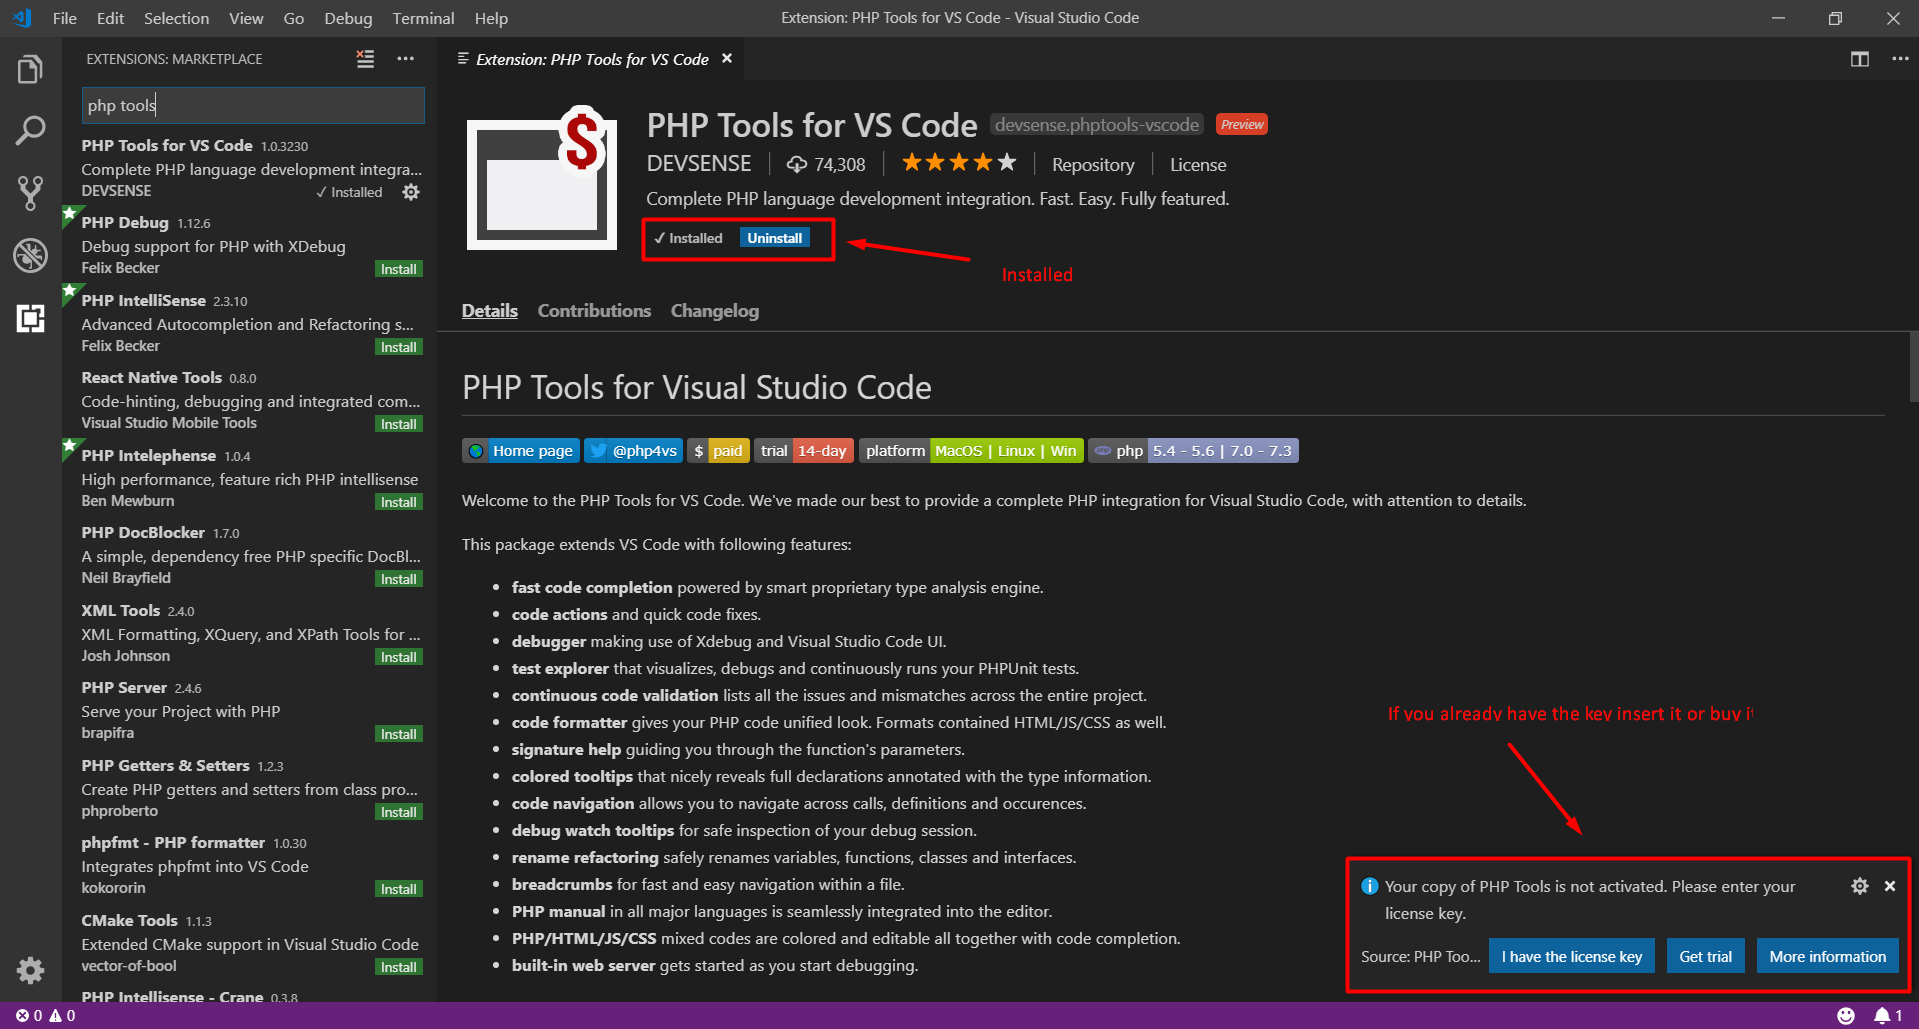 How to install PHP Tools for Visual Studio Code on Windows | DEVSENSE Blog